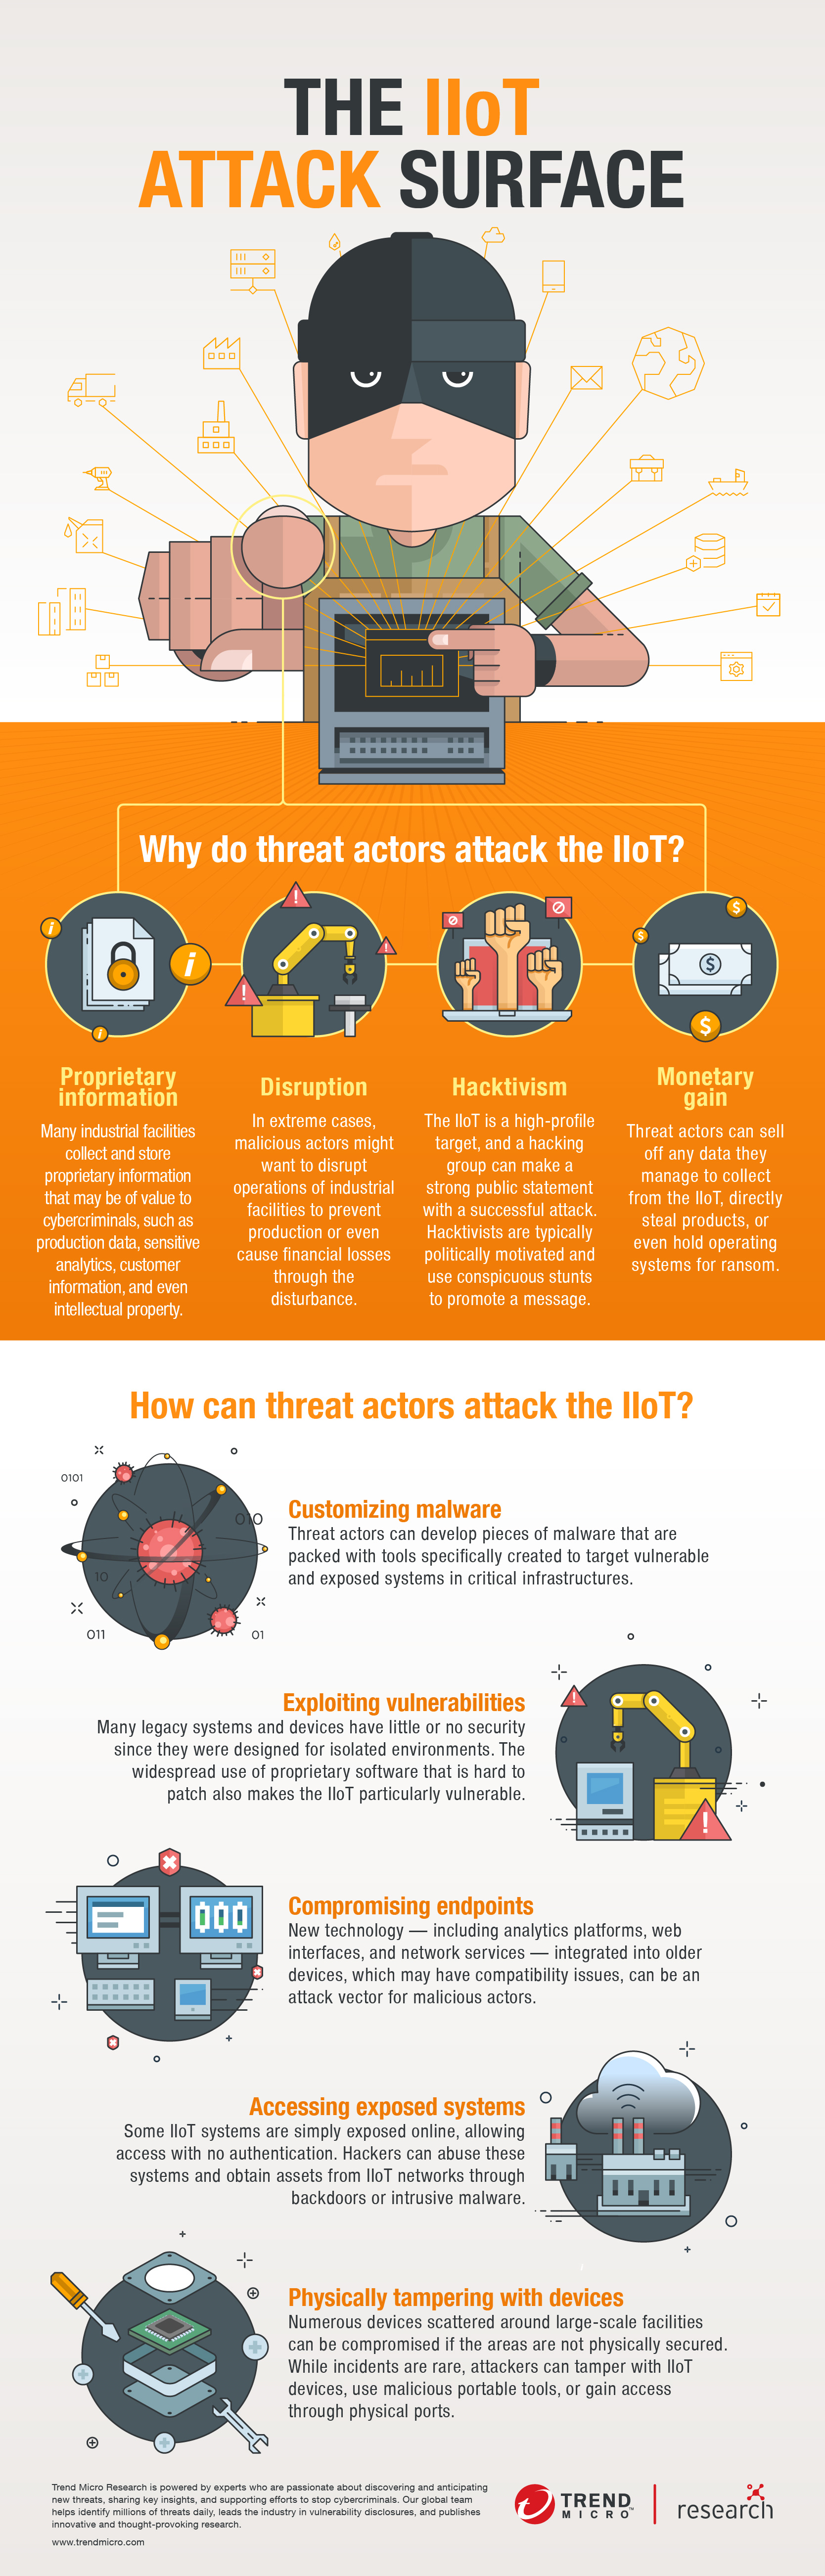 IIoT Attack Surface